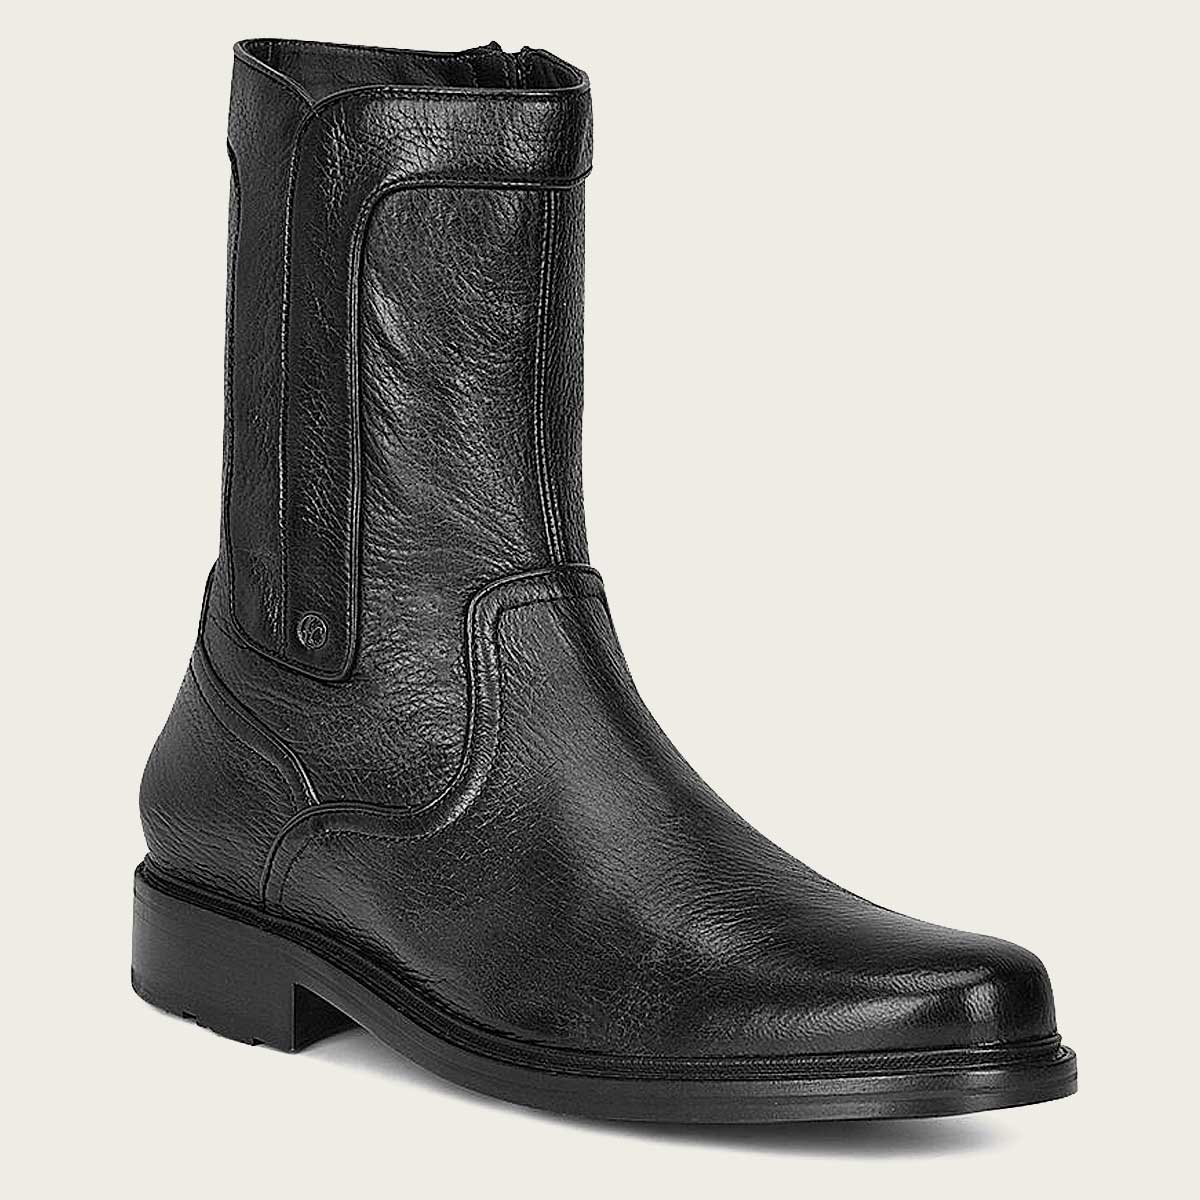 Black Deer Leather Boots for men. Designed to elevate your style with comfort and class